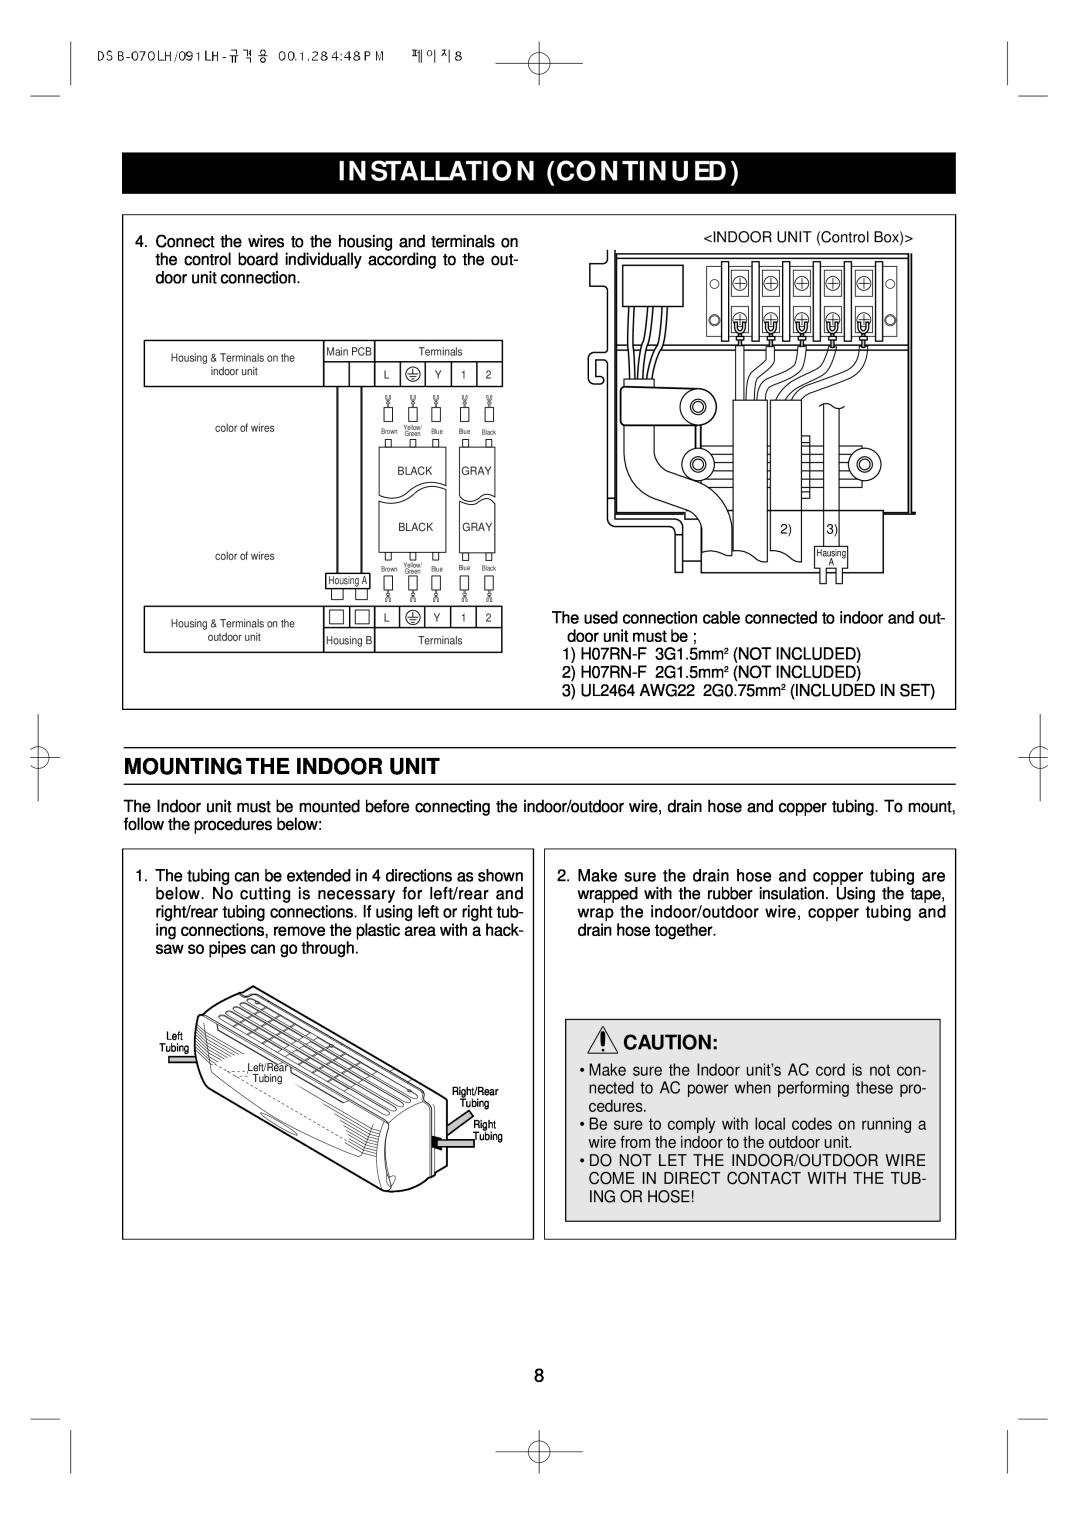 Daewoo Split Airconditioning System, DSB-071LH owner manual Mounting The Indoor Unit, Installation Continued 